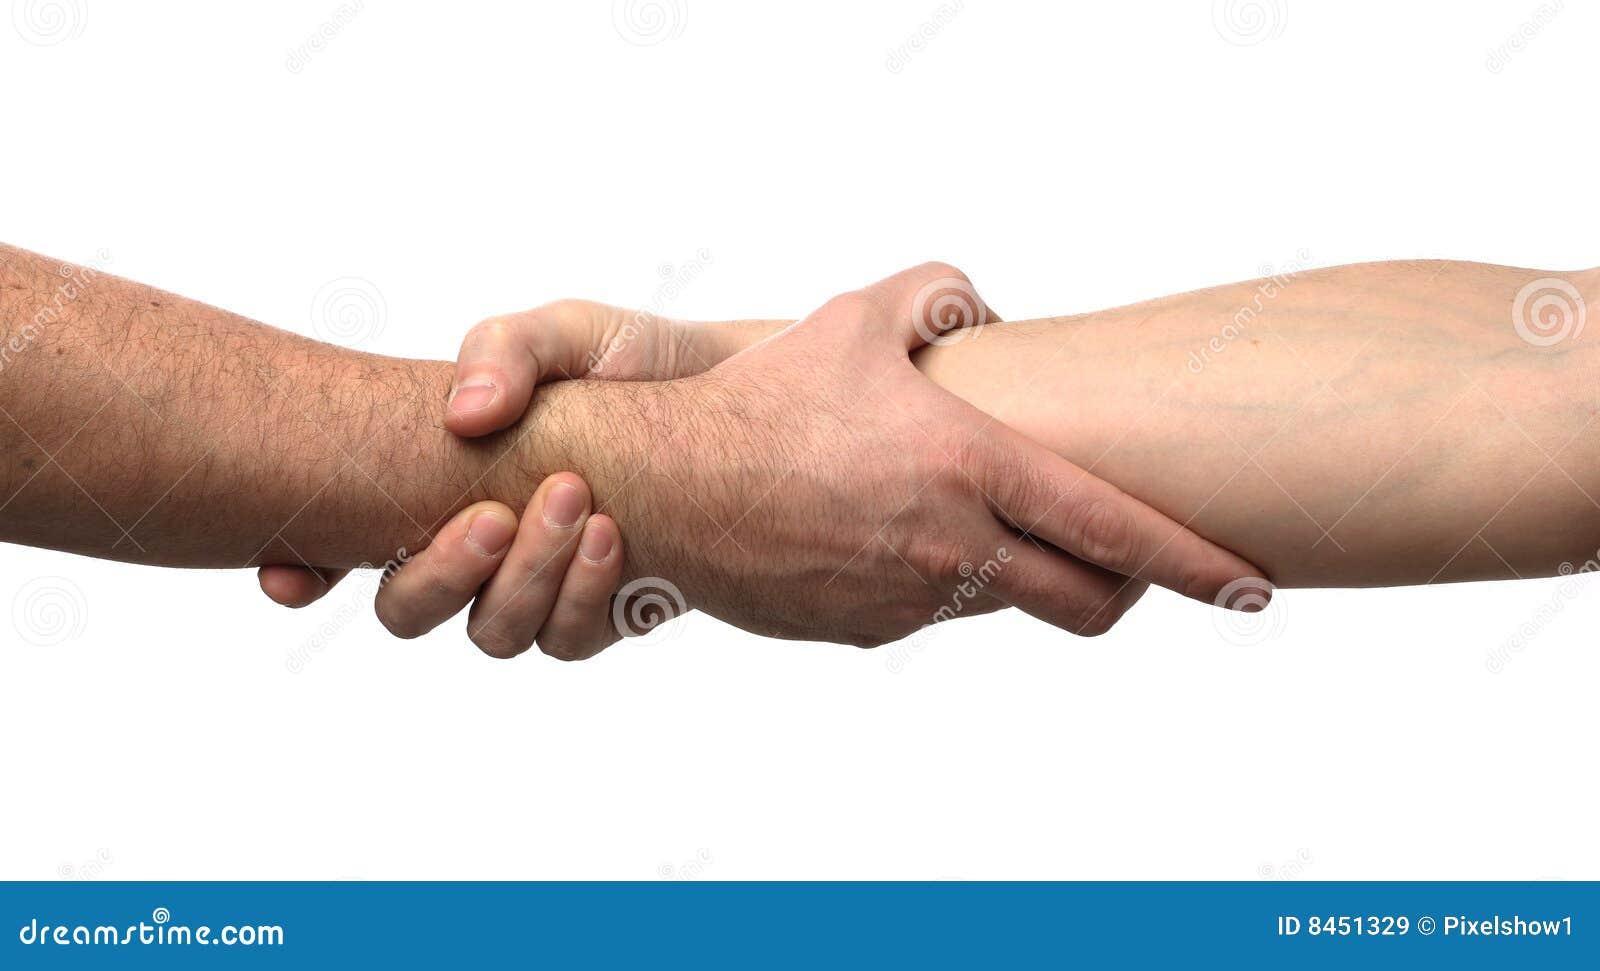 Shake hands stock image. Image of commerce, employment - 8451329